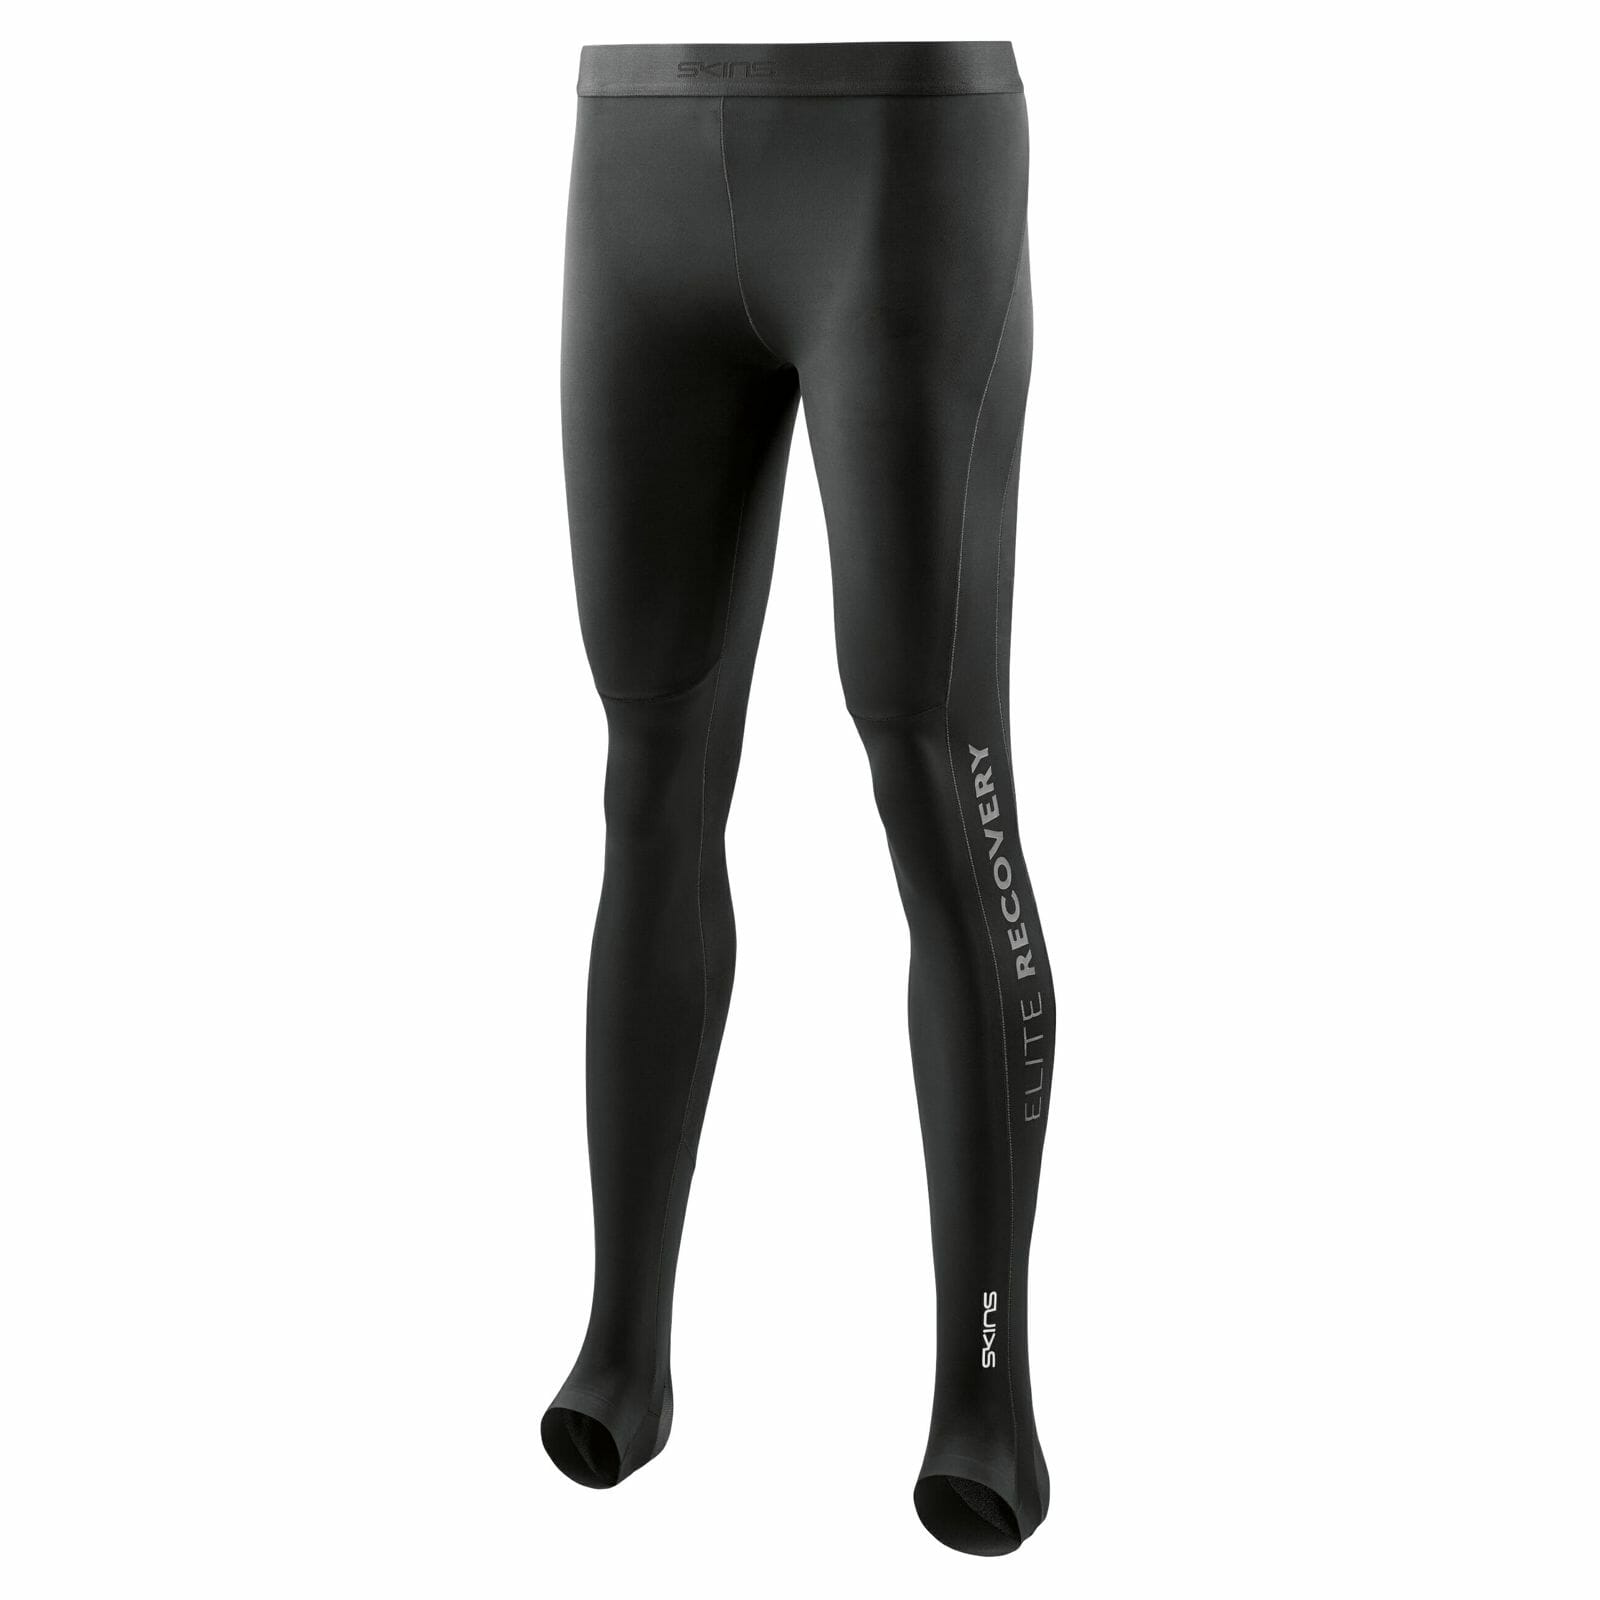 RUNNING/TRAIL SPECIAL Skins DNAMIC - Compression Tights - Women's